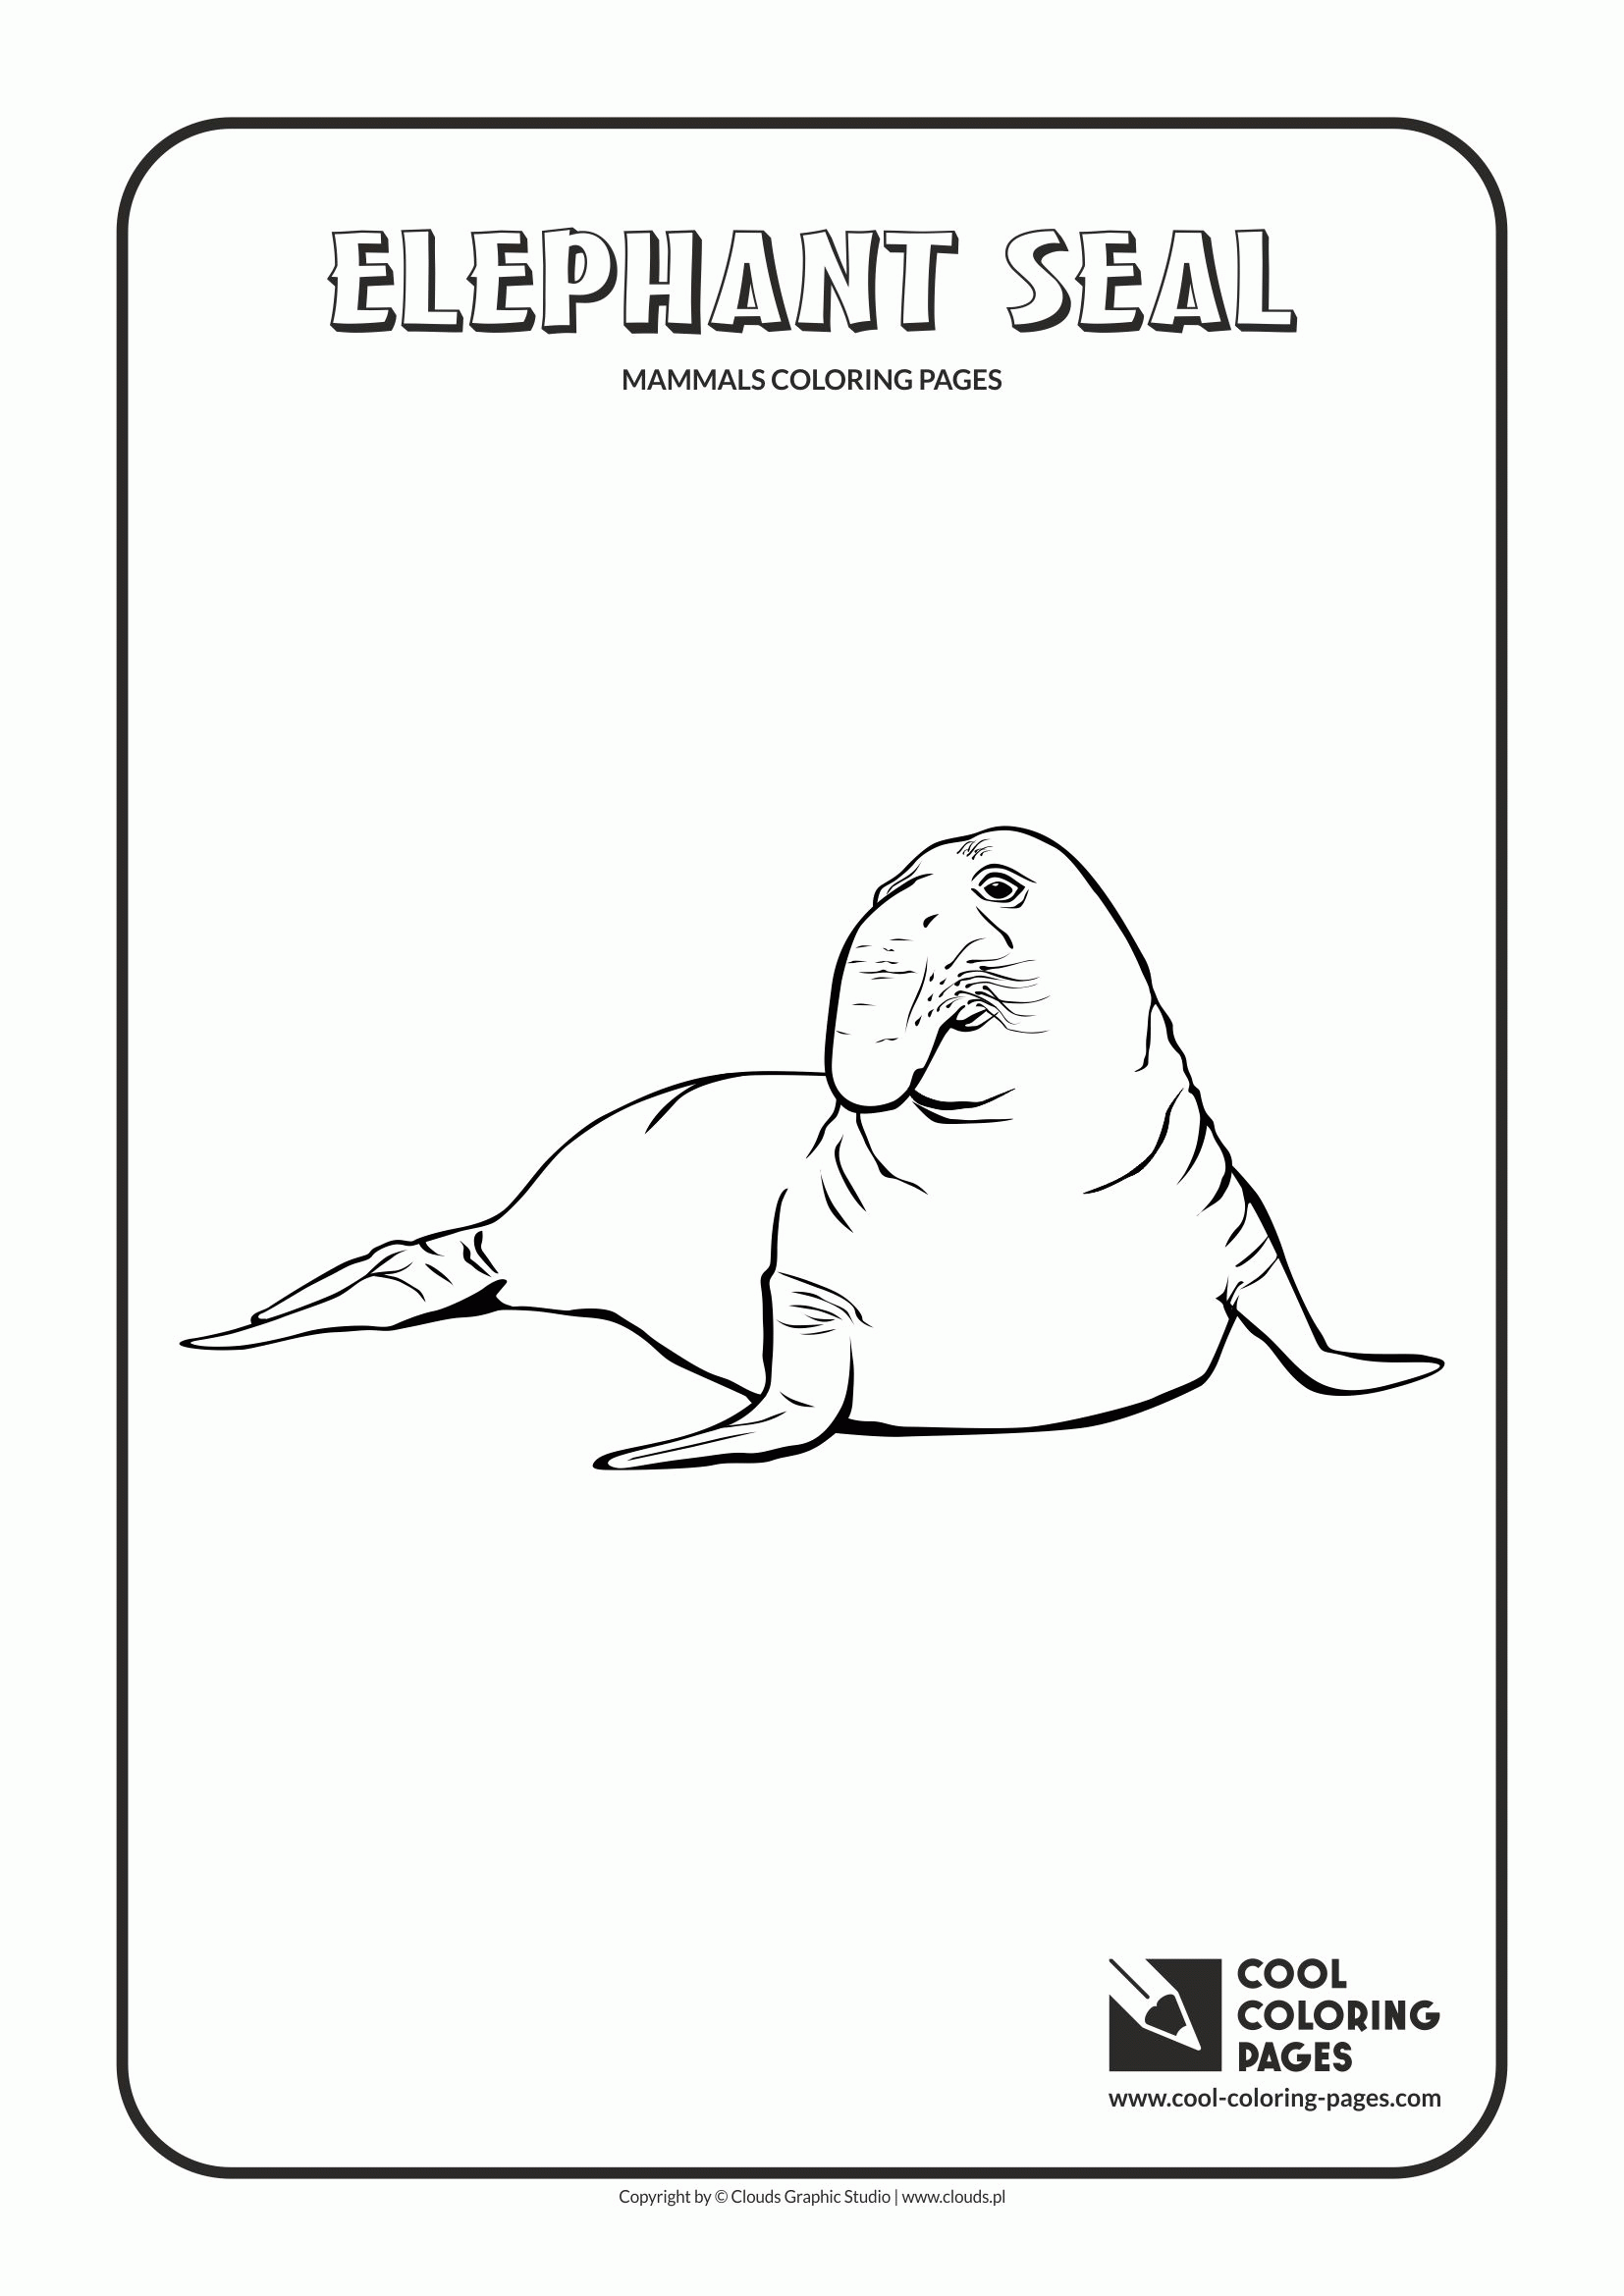 Mammals coloring pages | Cool Coloring Pages